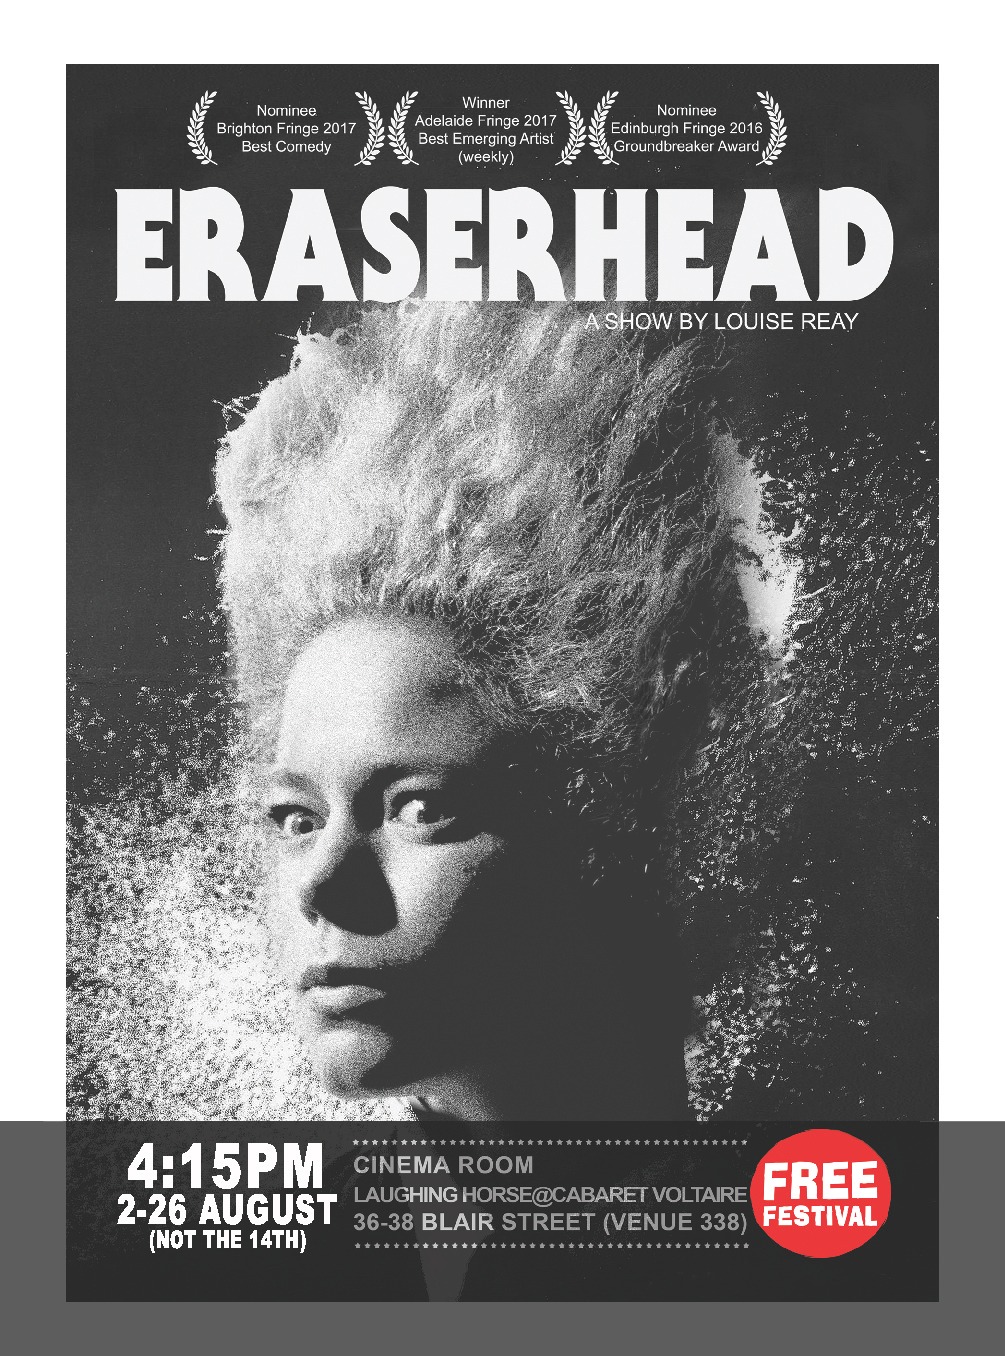 The poster for Louise Reay: Eraserhead